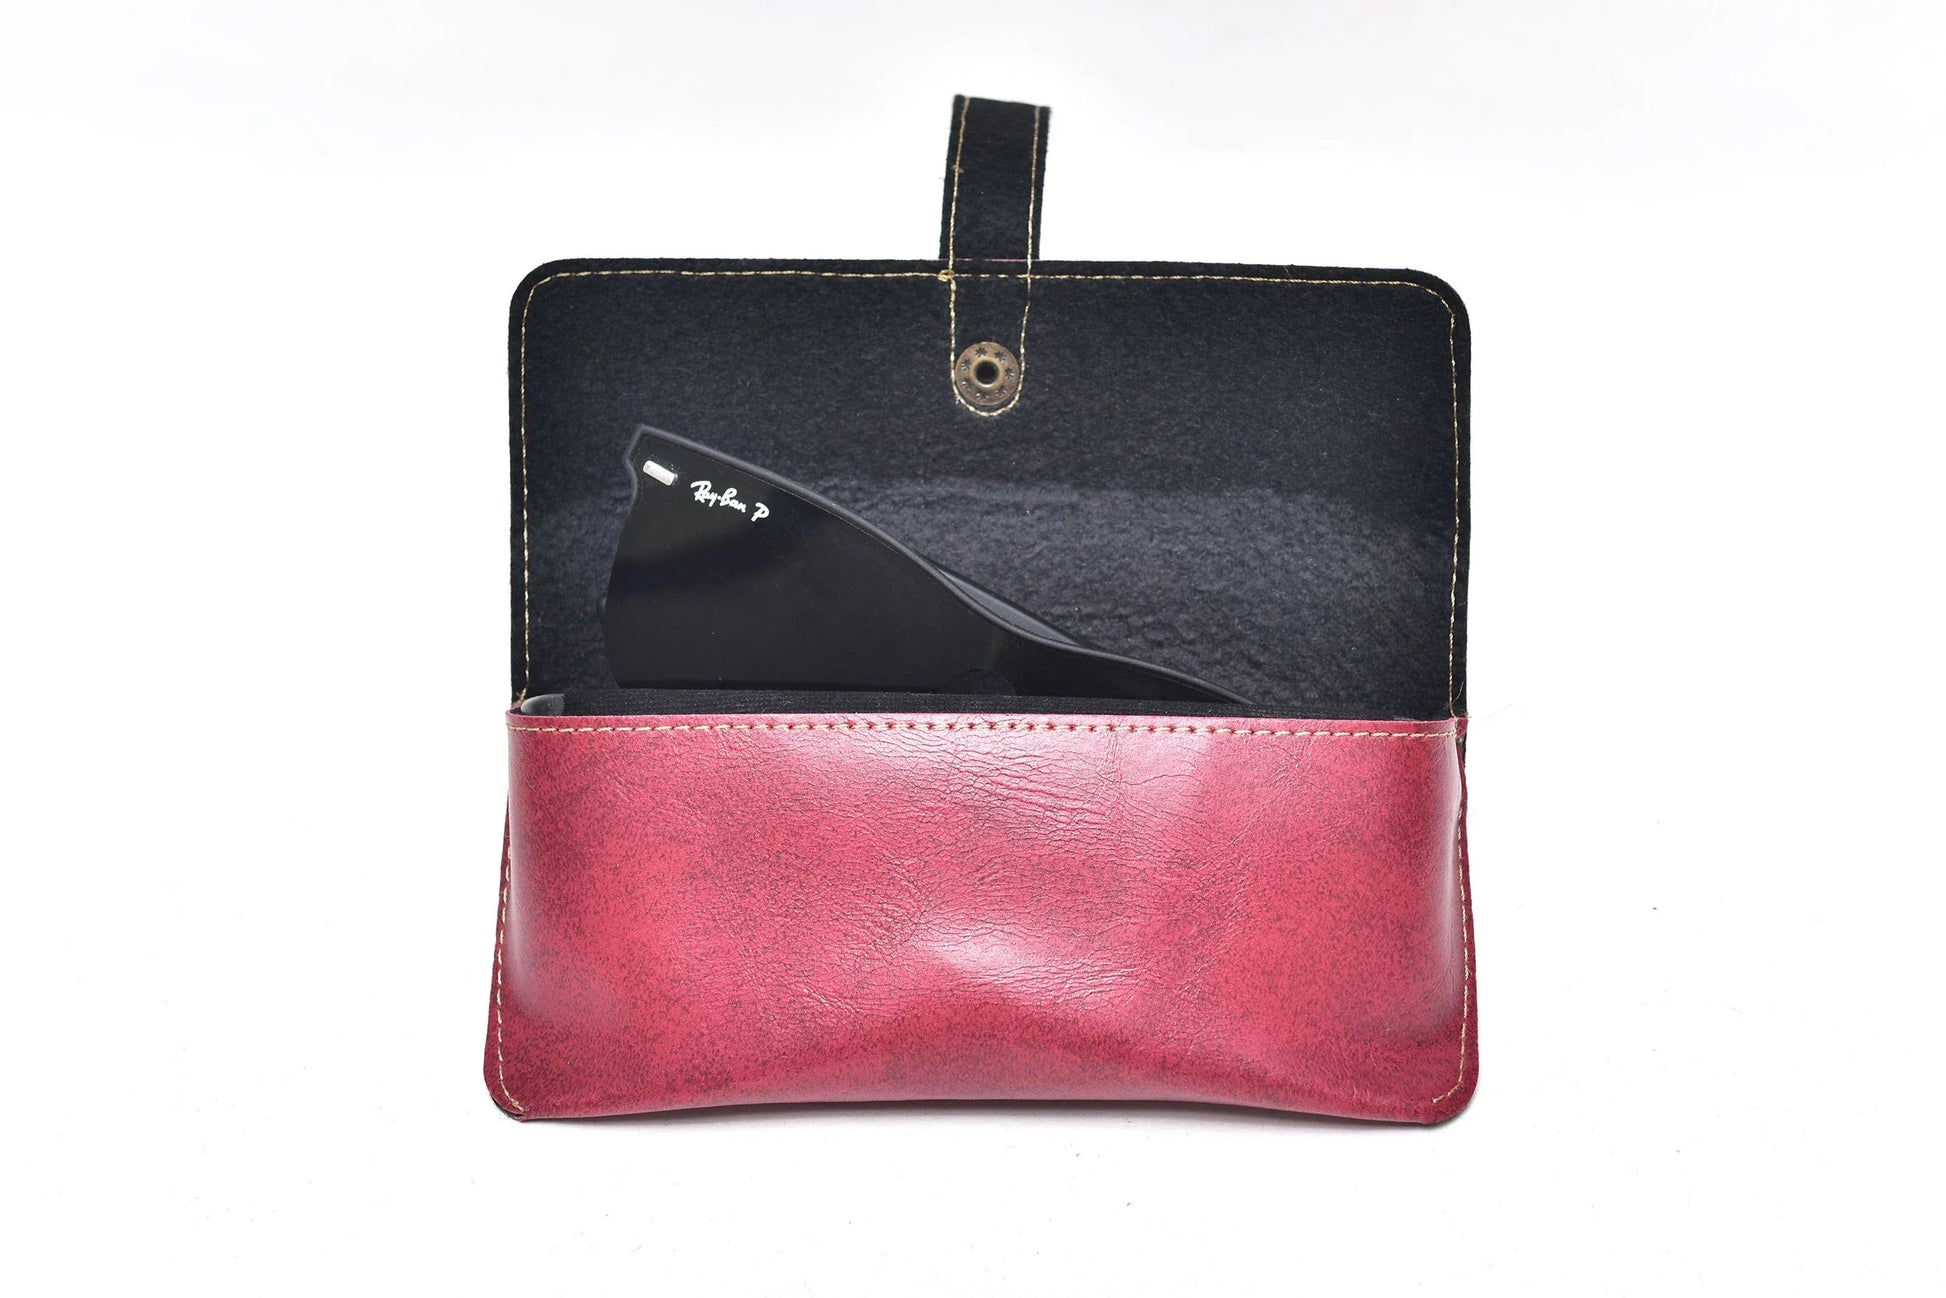 Inside or open view of maroon sunglasses case